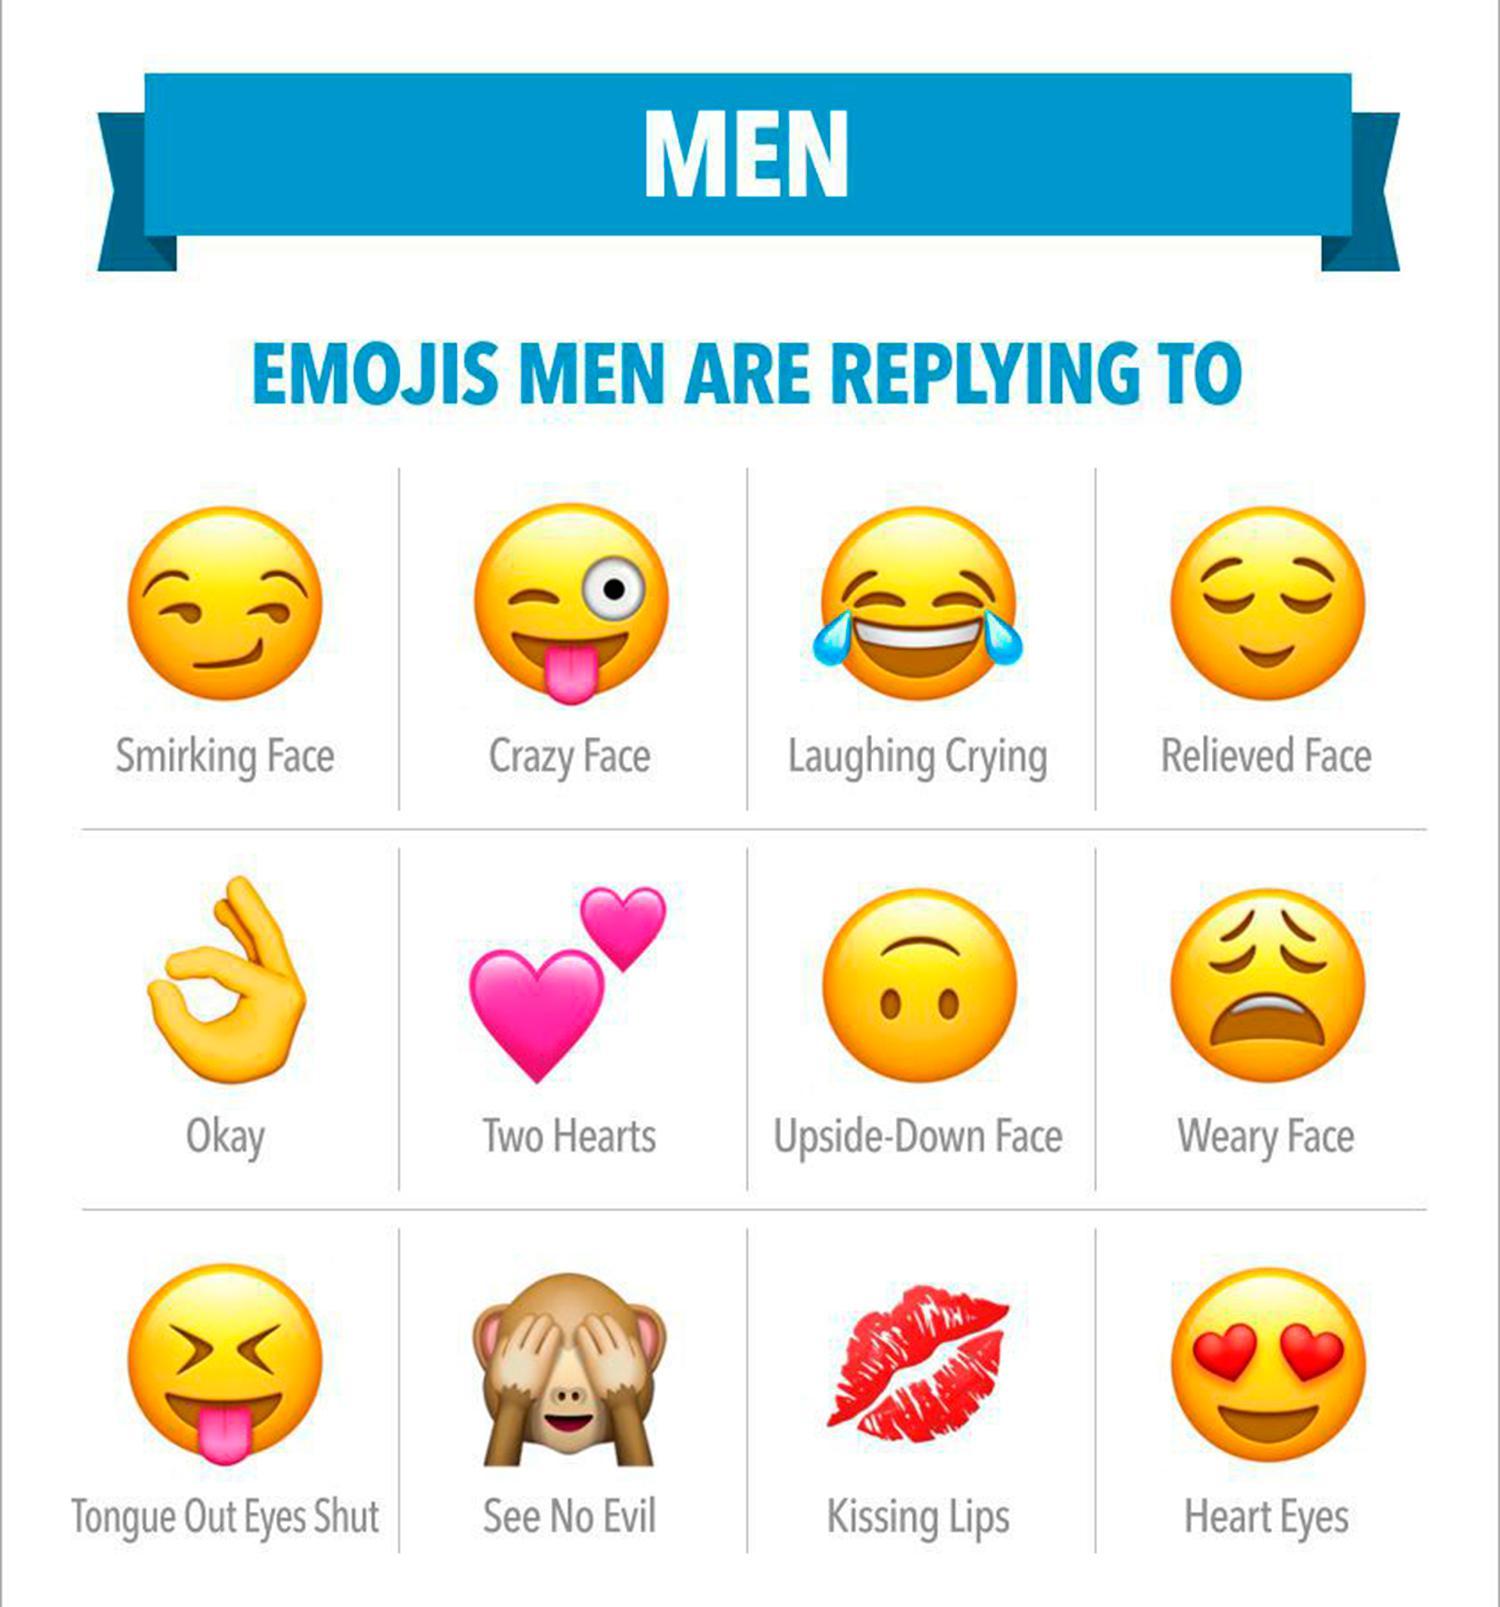 These Are The Emojis Men And Women Like Best In Flirty Text. 